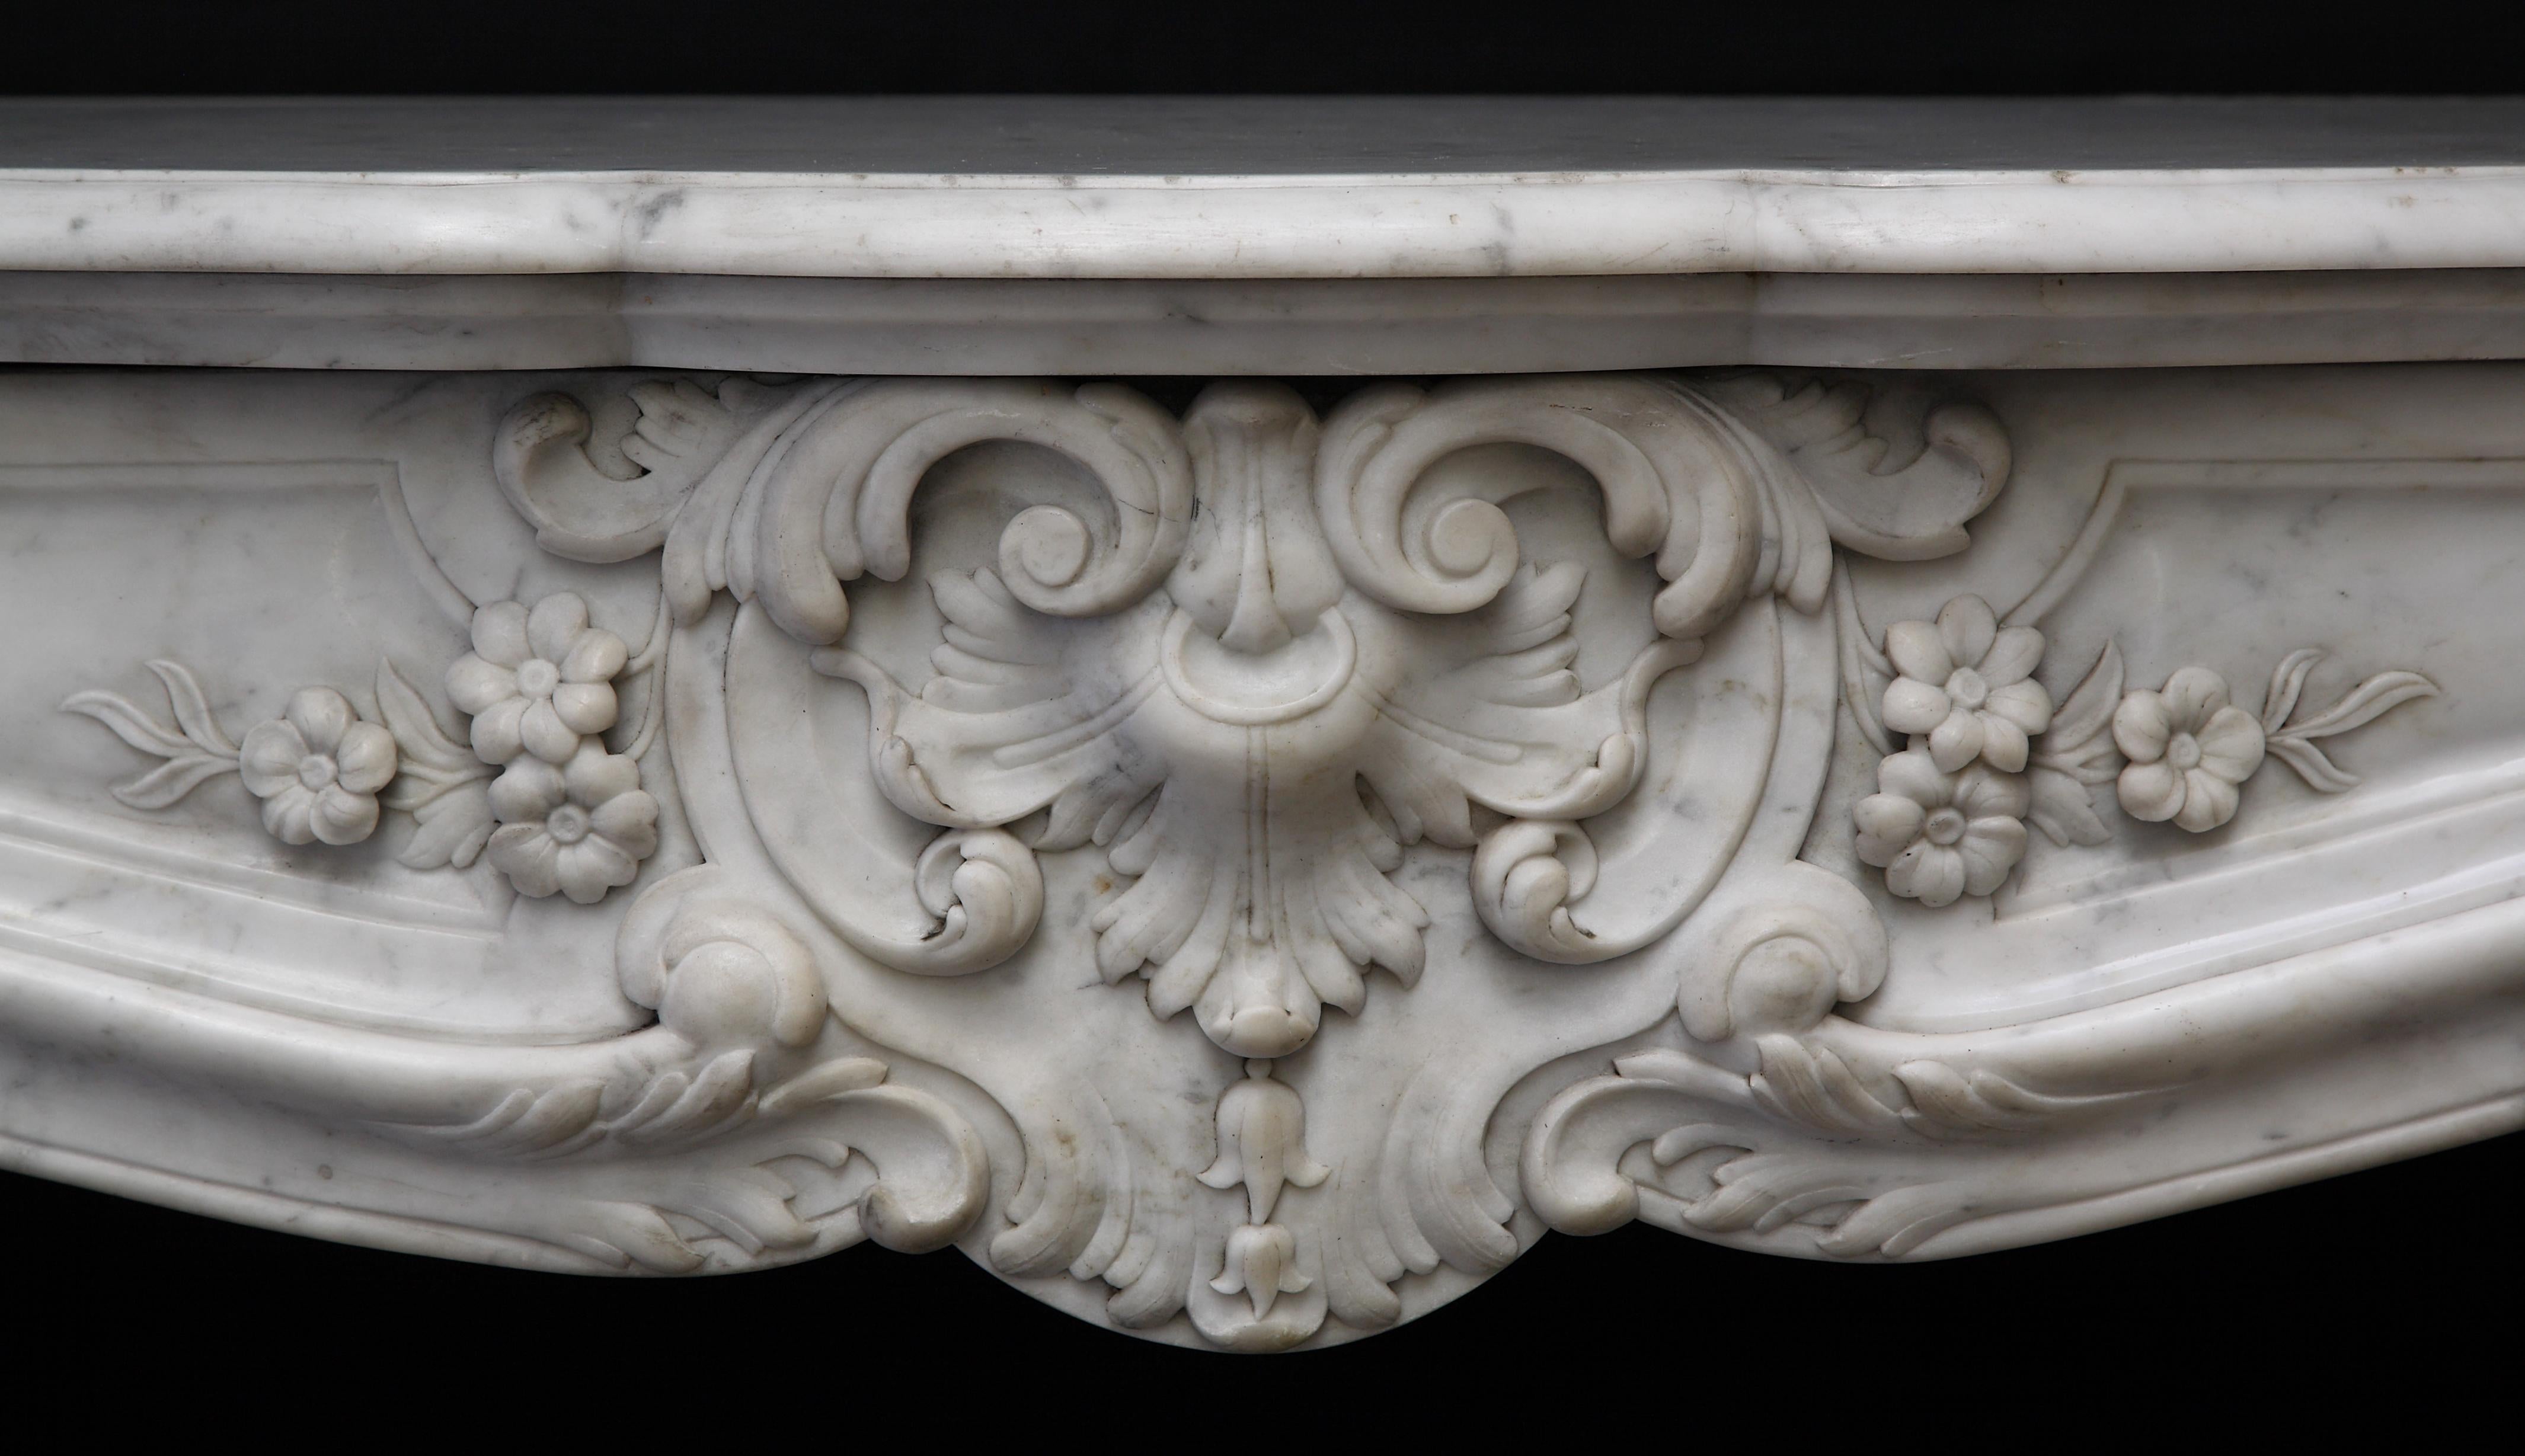 A fine large Louis XV style chimney mantelpiece, made in serpentine shaped white « Carrara » marble, ornamented with scrolls, flowers and a centering shell cartouche.

Measures: Height : 108 cm (42 1/2 in.) ; Width : 144 cm (56 2/3 in.) ; Depth :